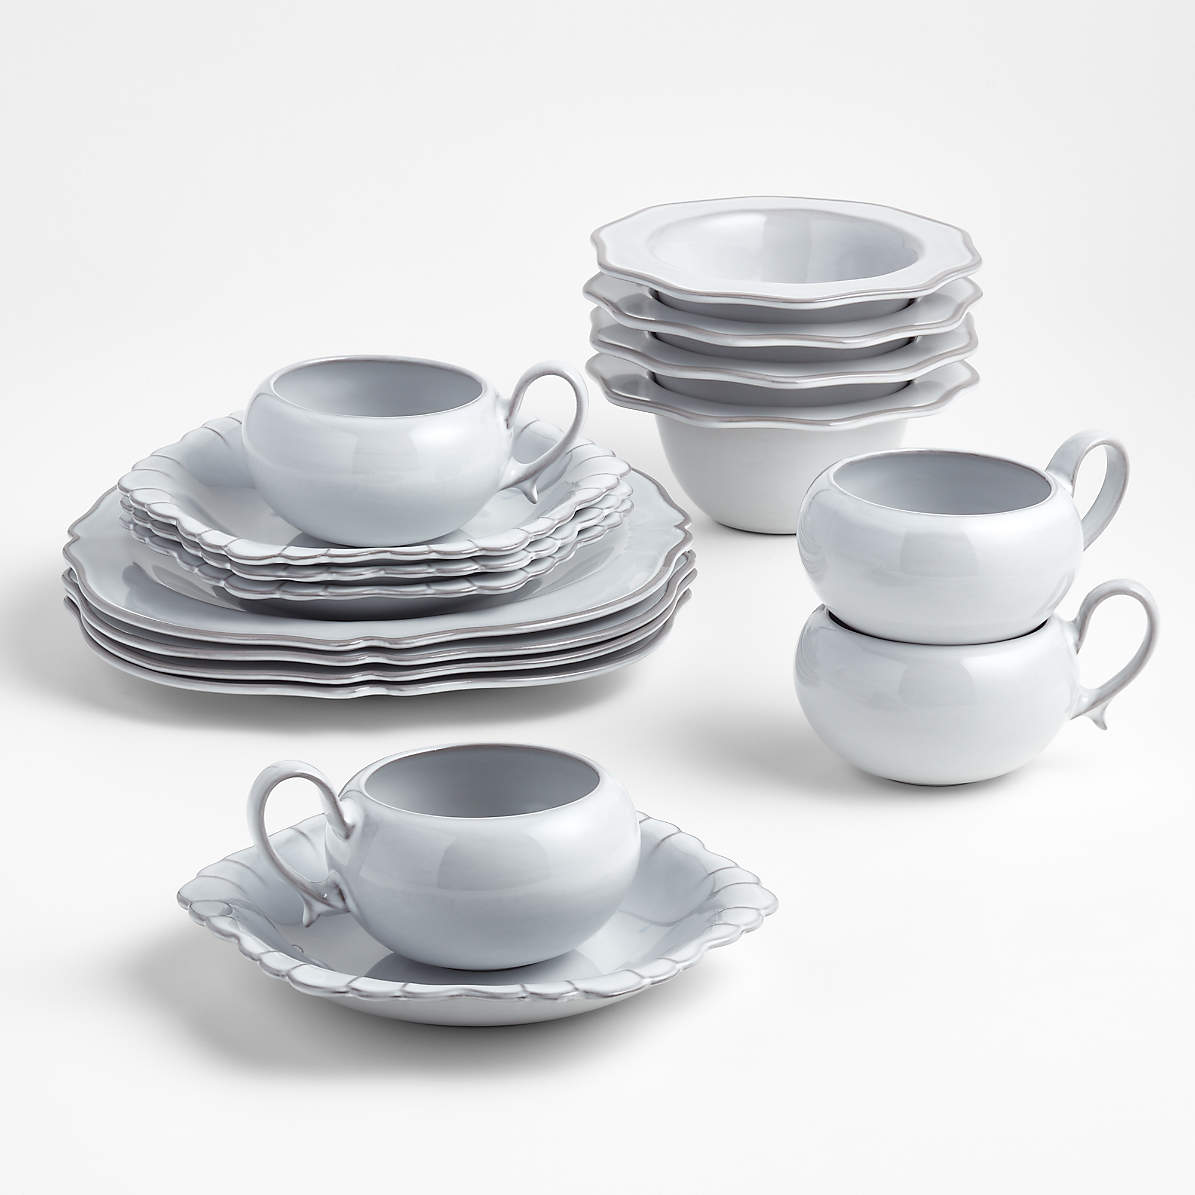 Details about   CRATE and  BARREL Solid White Porcelain Mug and Sandwich Plate 2PC Set *NEW* 